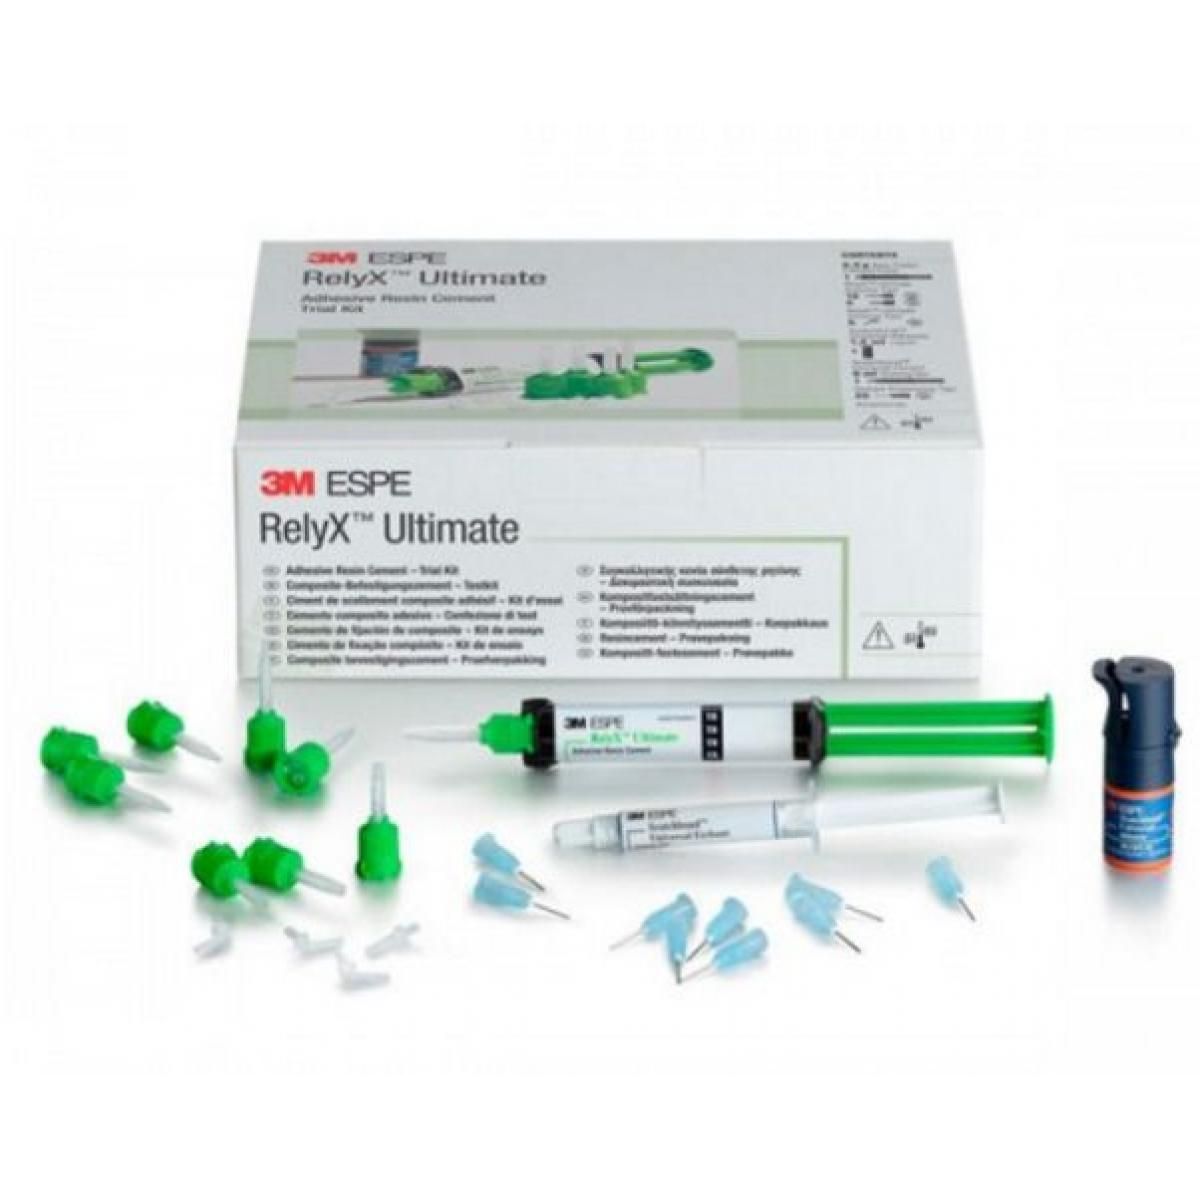 RELYX ULTIMATE TRIAL KIT 56892 3M -